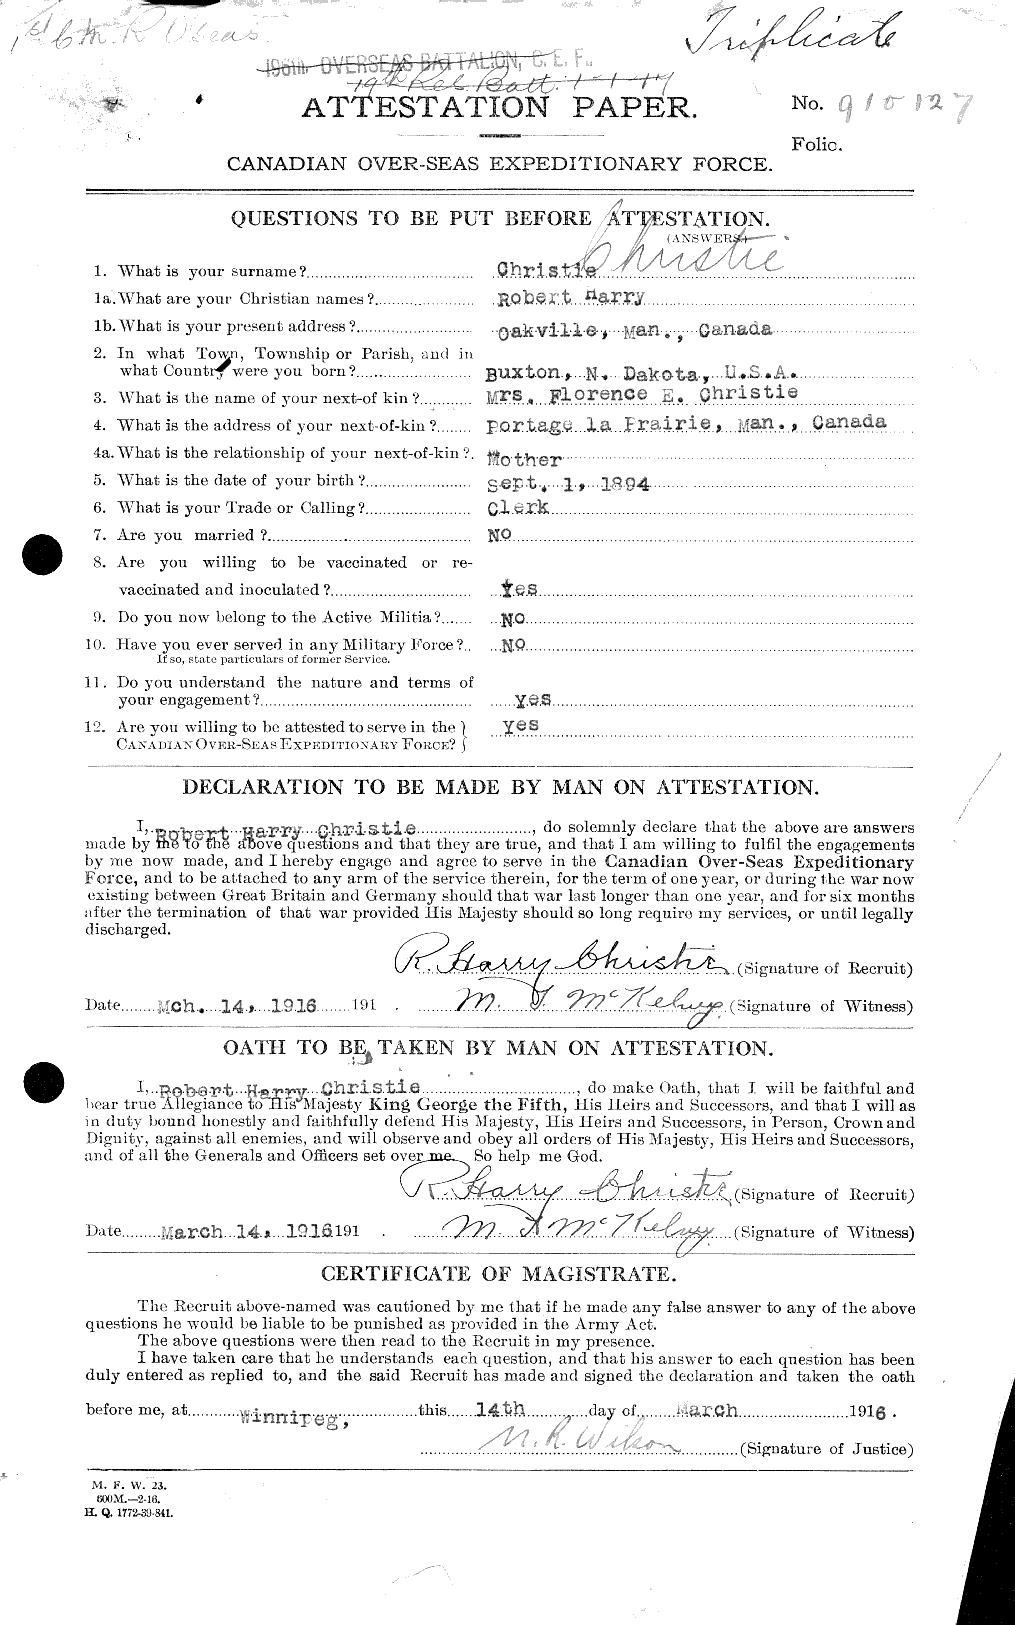 Personnel Records of the First World War - CEF 022054a